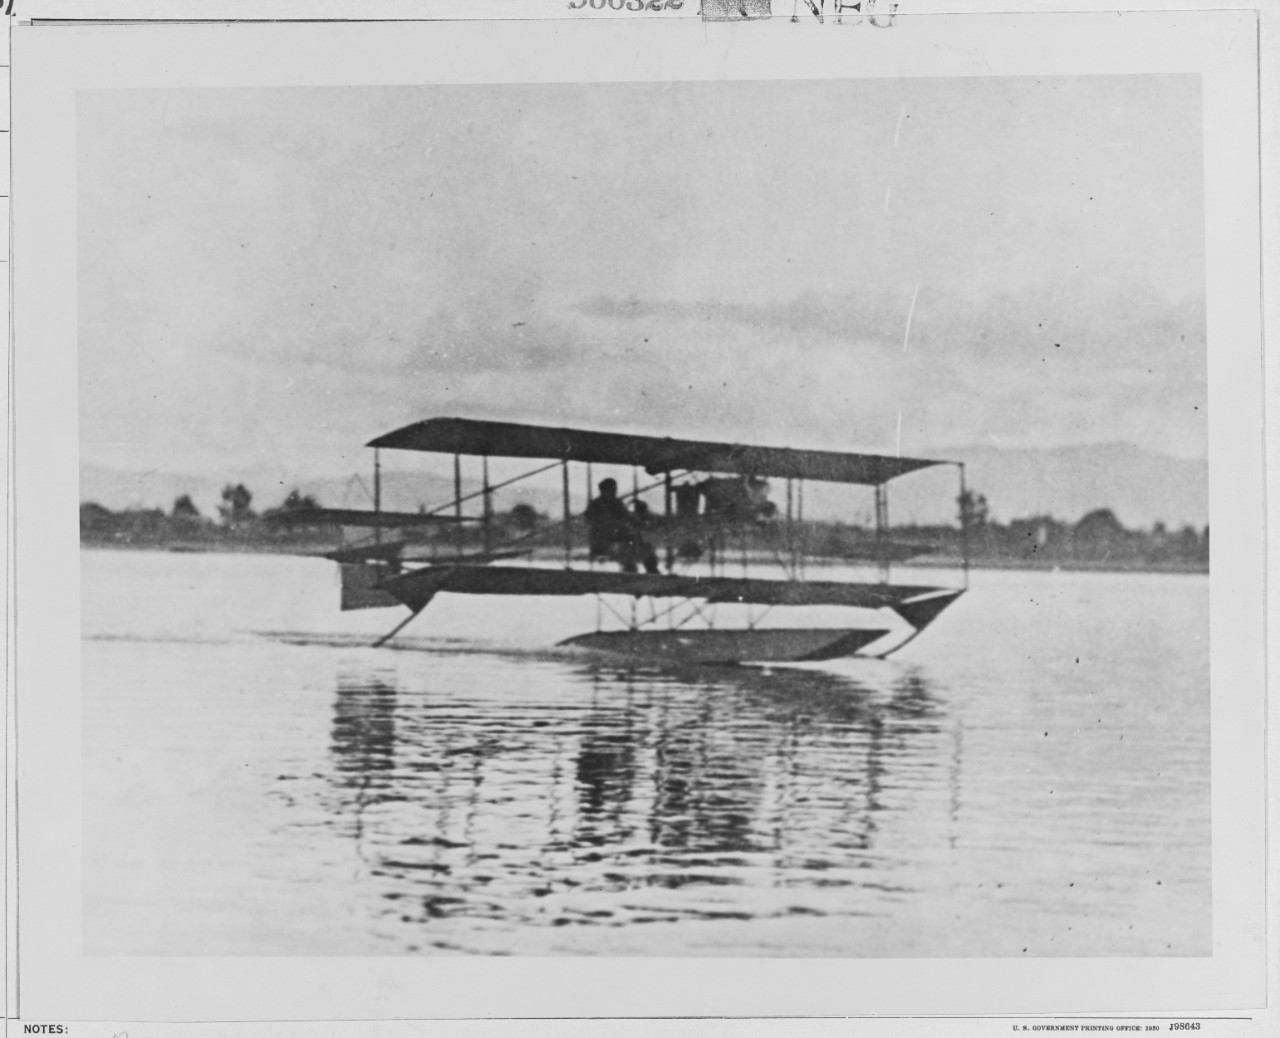 First Tractor, seaplane.